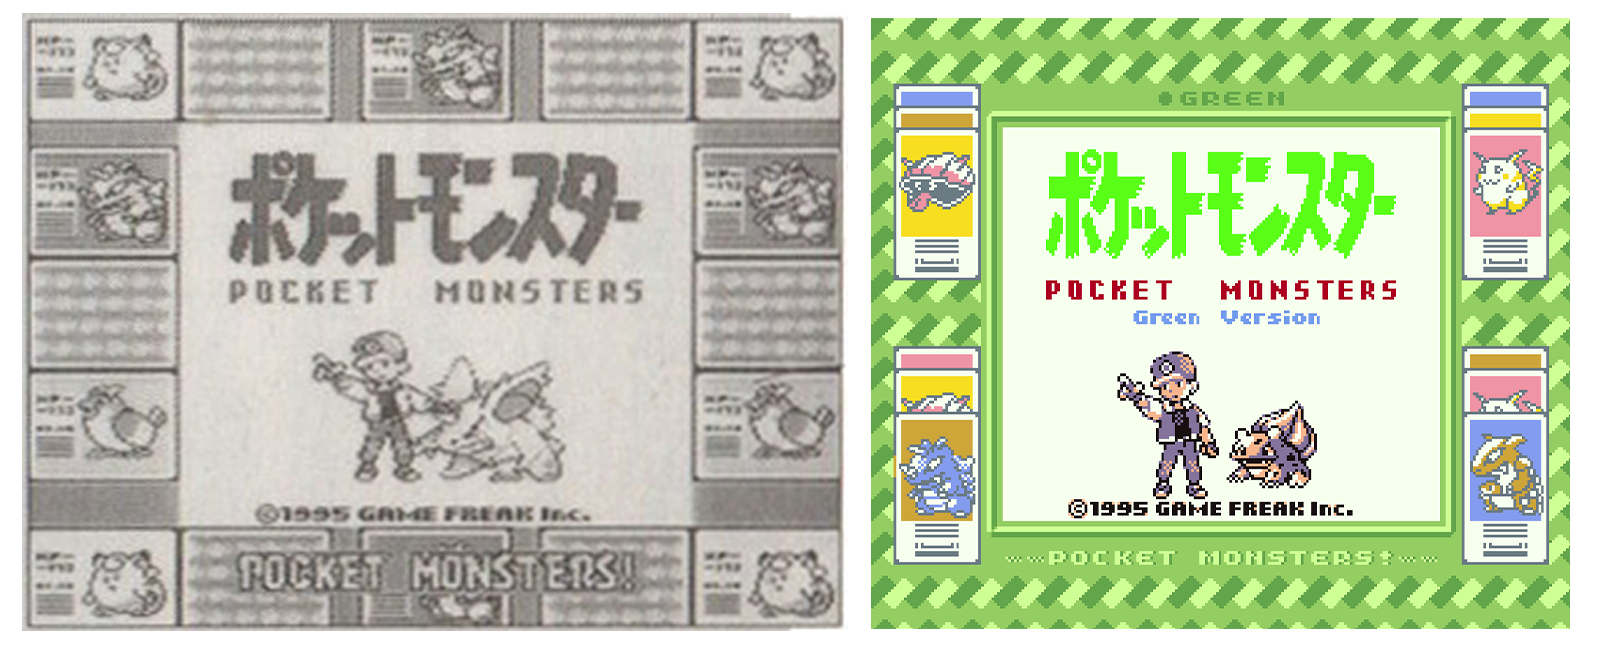 Game Boy Camera and Mew Distribution Cartridge: Connections to the  Spaceworld Demo - Plague von Karma's Pokemon Prototype Research Blog